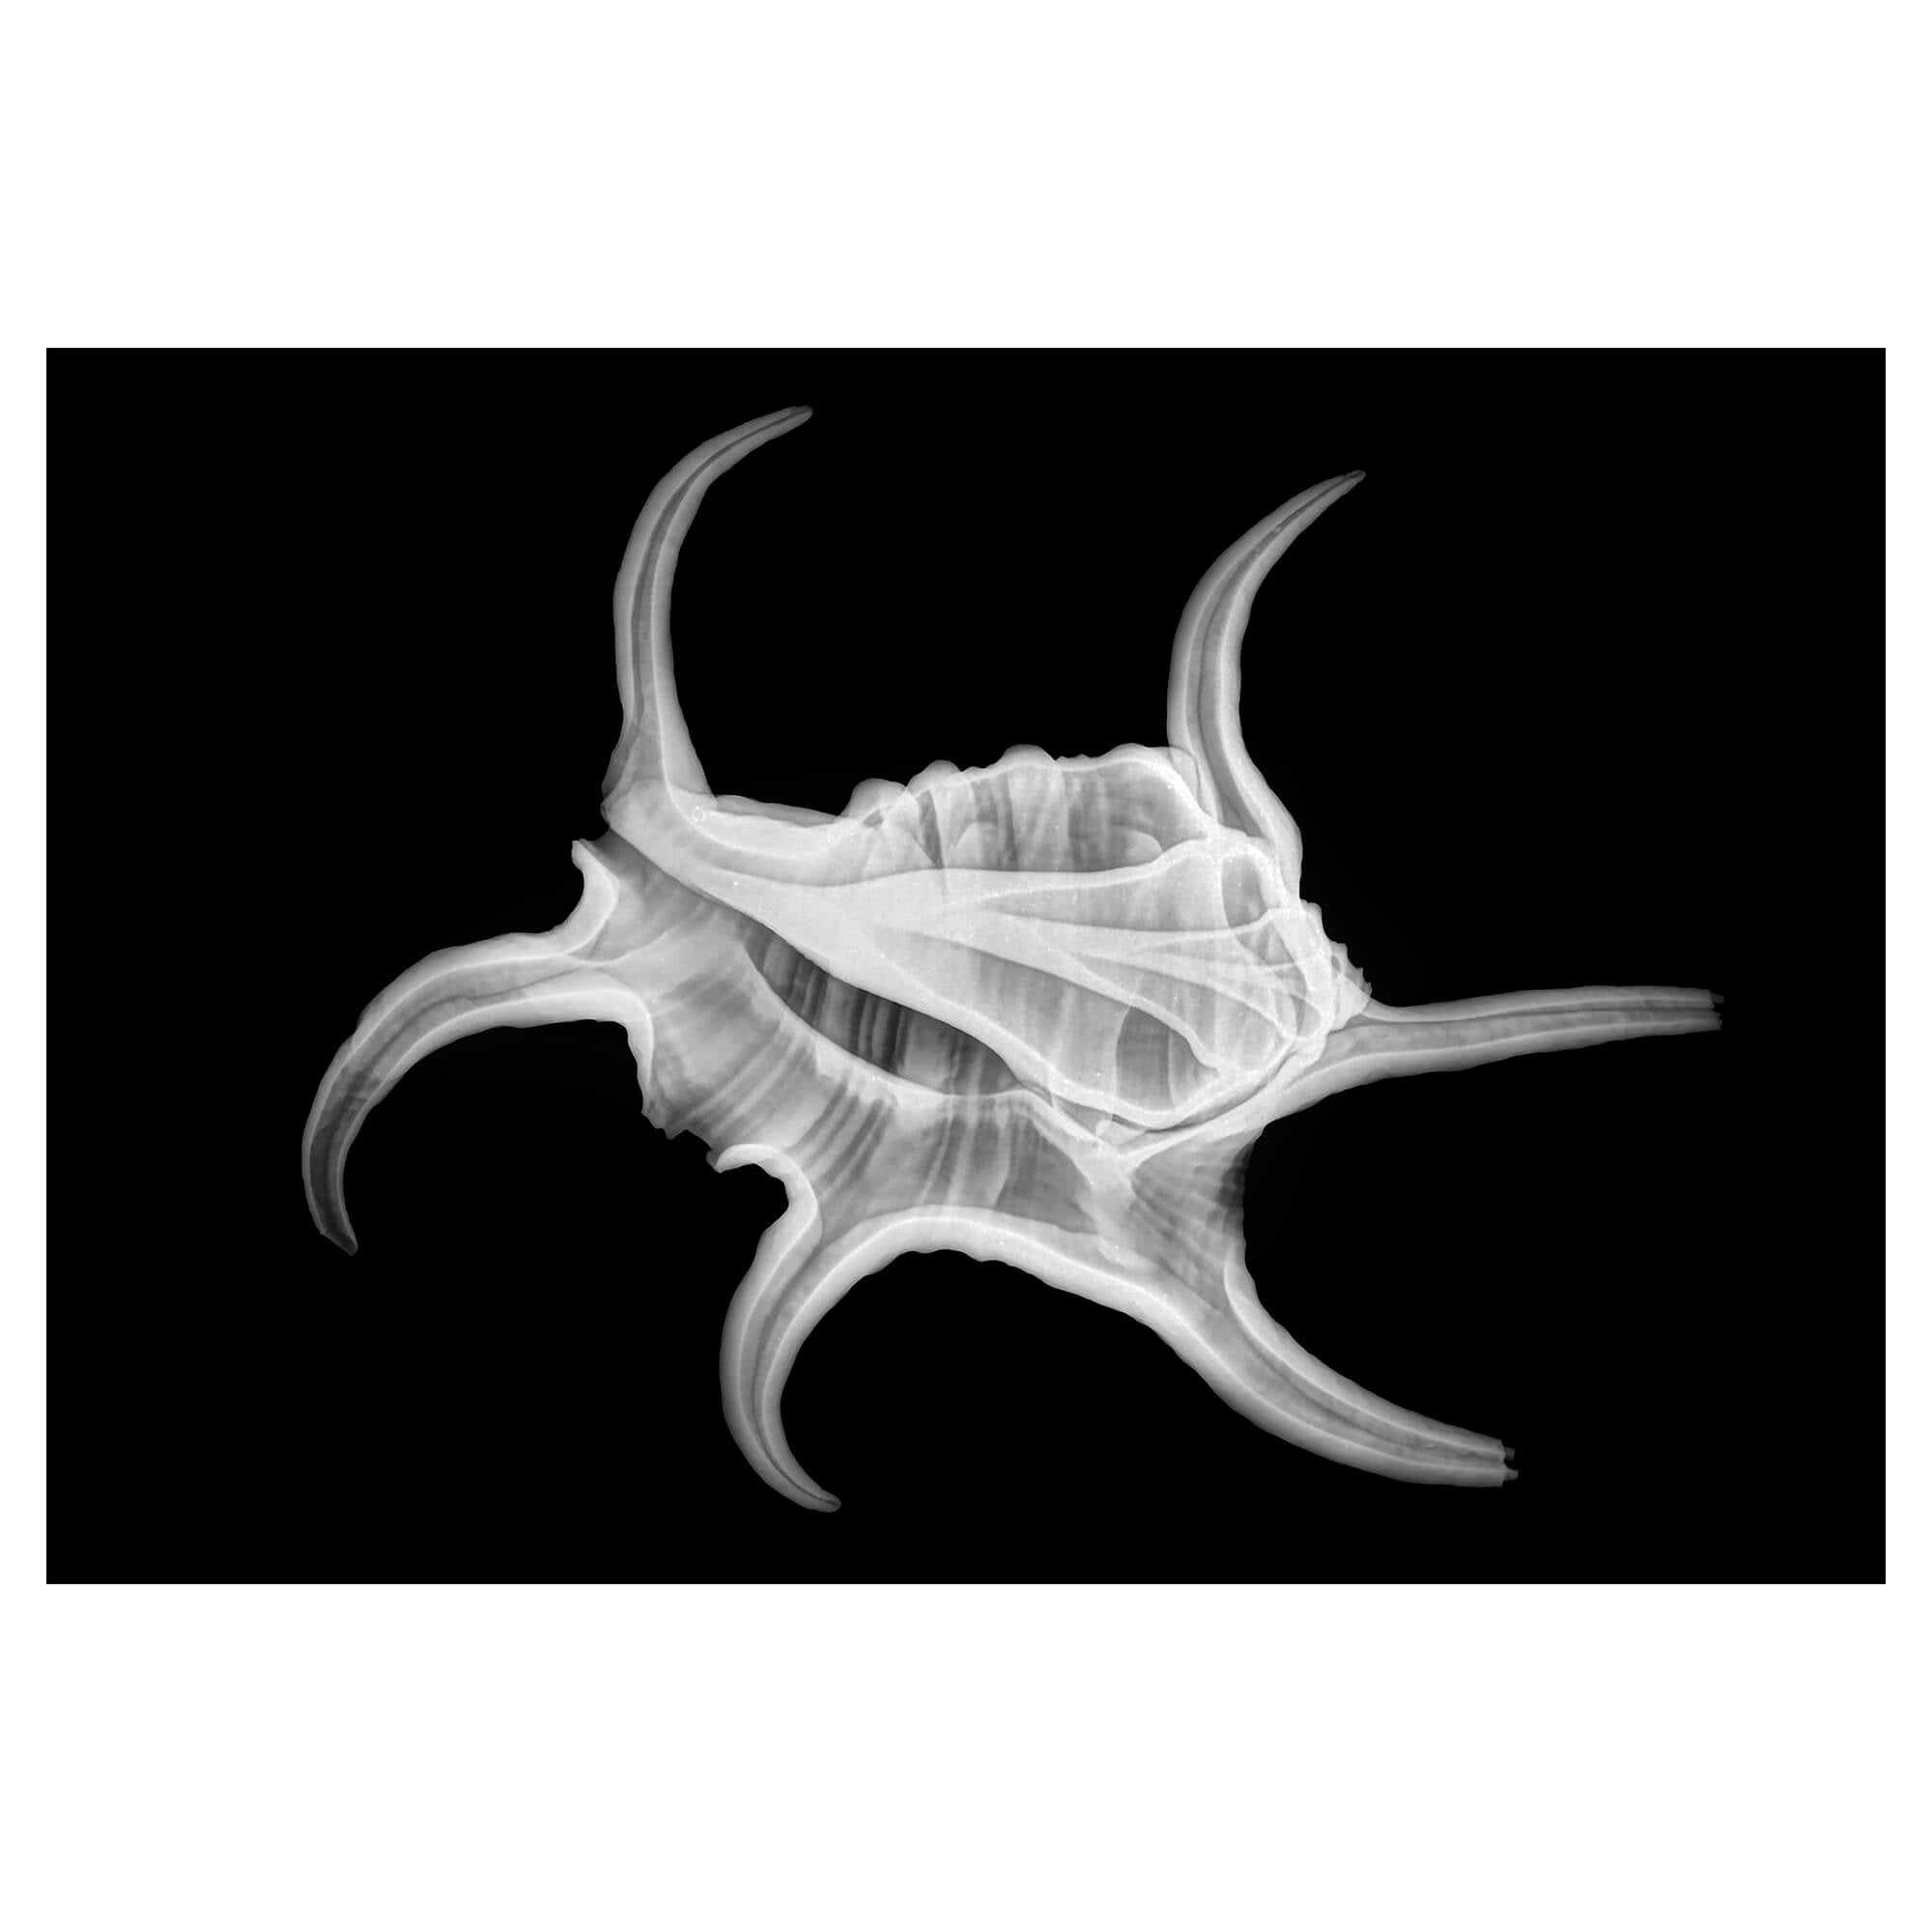 X-ray prints of the spider conch by Hawaii artist Michelle Smith